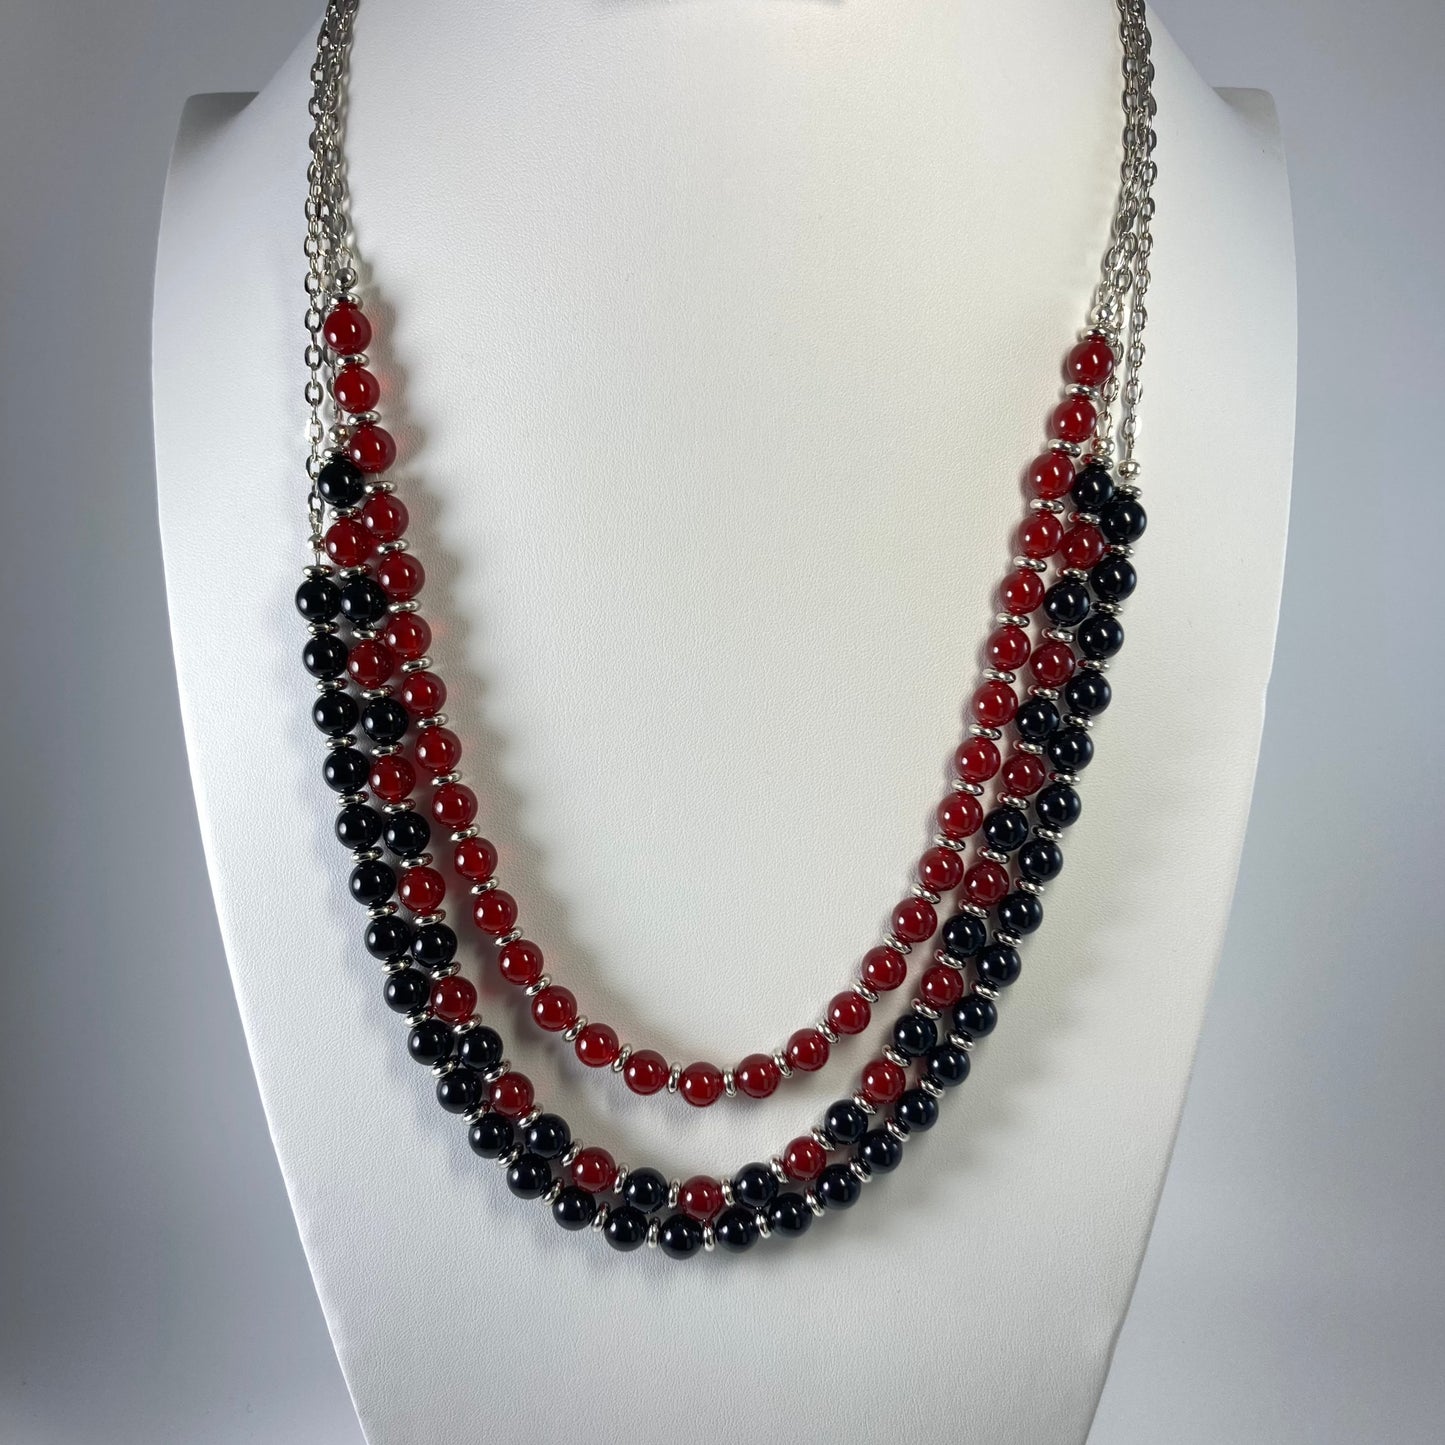 FTNS35 - 3 Strand Red, Black & Silver Necklace w/ Earrings